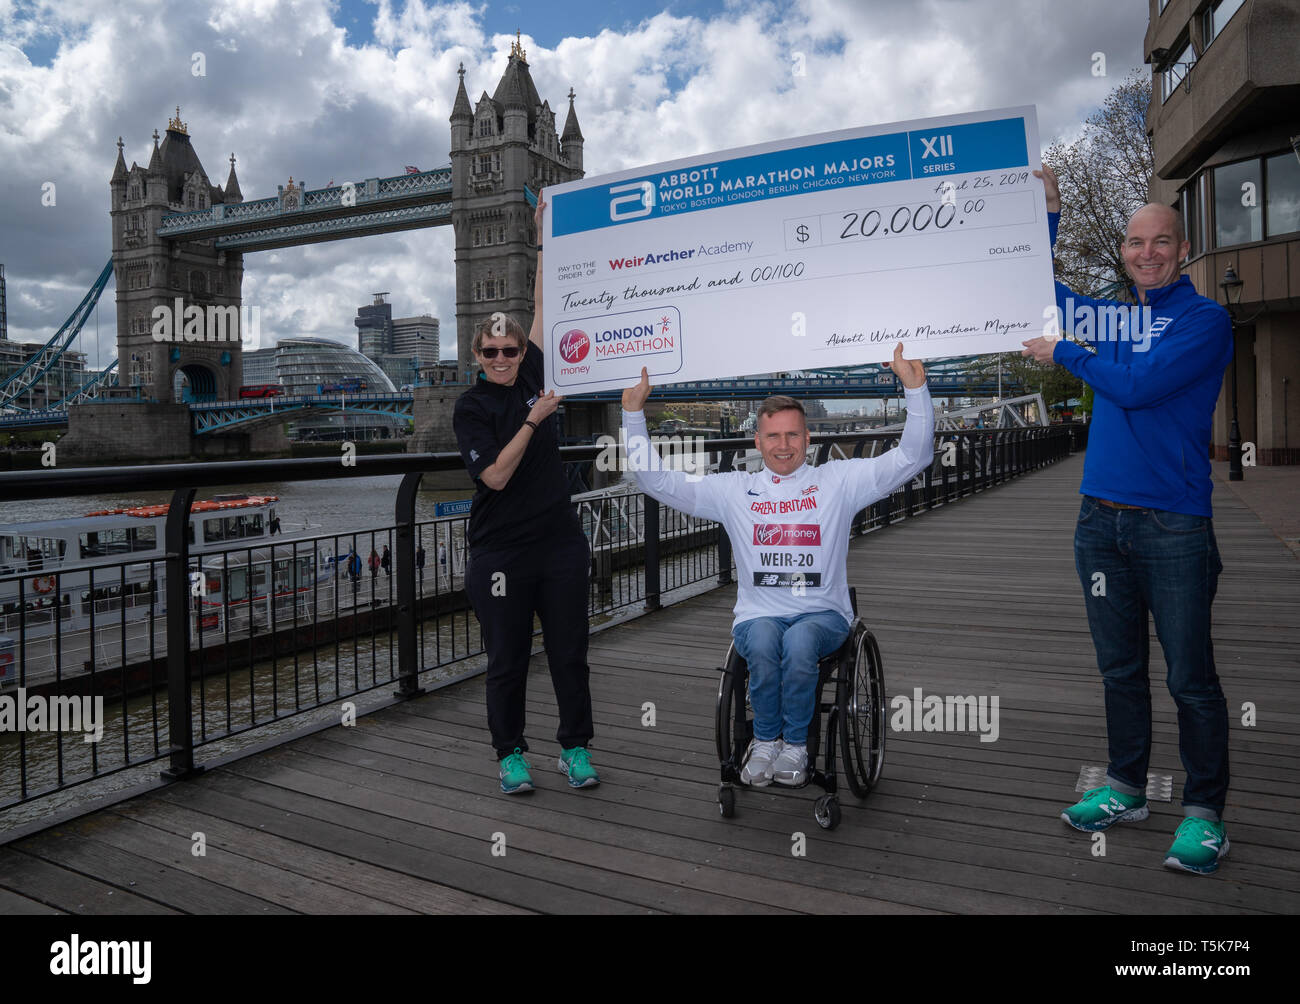 David Weir flanked by Michelle Weltman, Elite Wheelchair Coordinator, Abbot World Marathon Majors and Chris Miller DVP, Global Brand Strategy & Innovation, Abbott accepts a cheque on behalf of the Weir Archer Academy from Abbot World Marathon Majors for £20,000 to mark his 20th consecutive London Marathon during a photocall outside Tower Bridge, London. Stock Photo